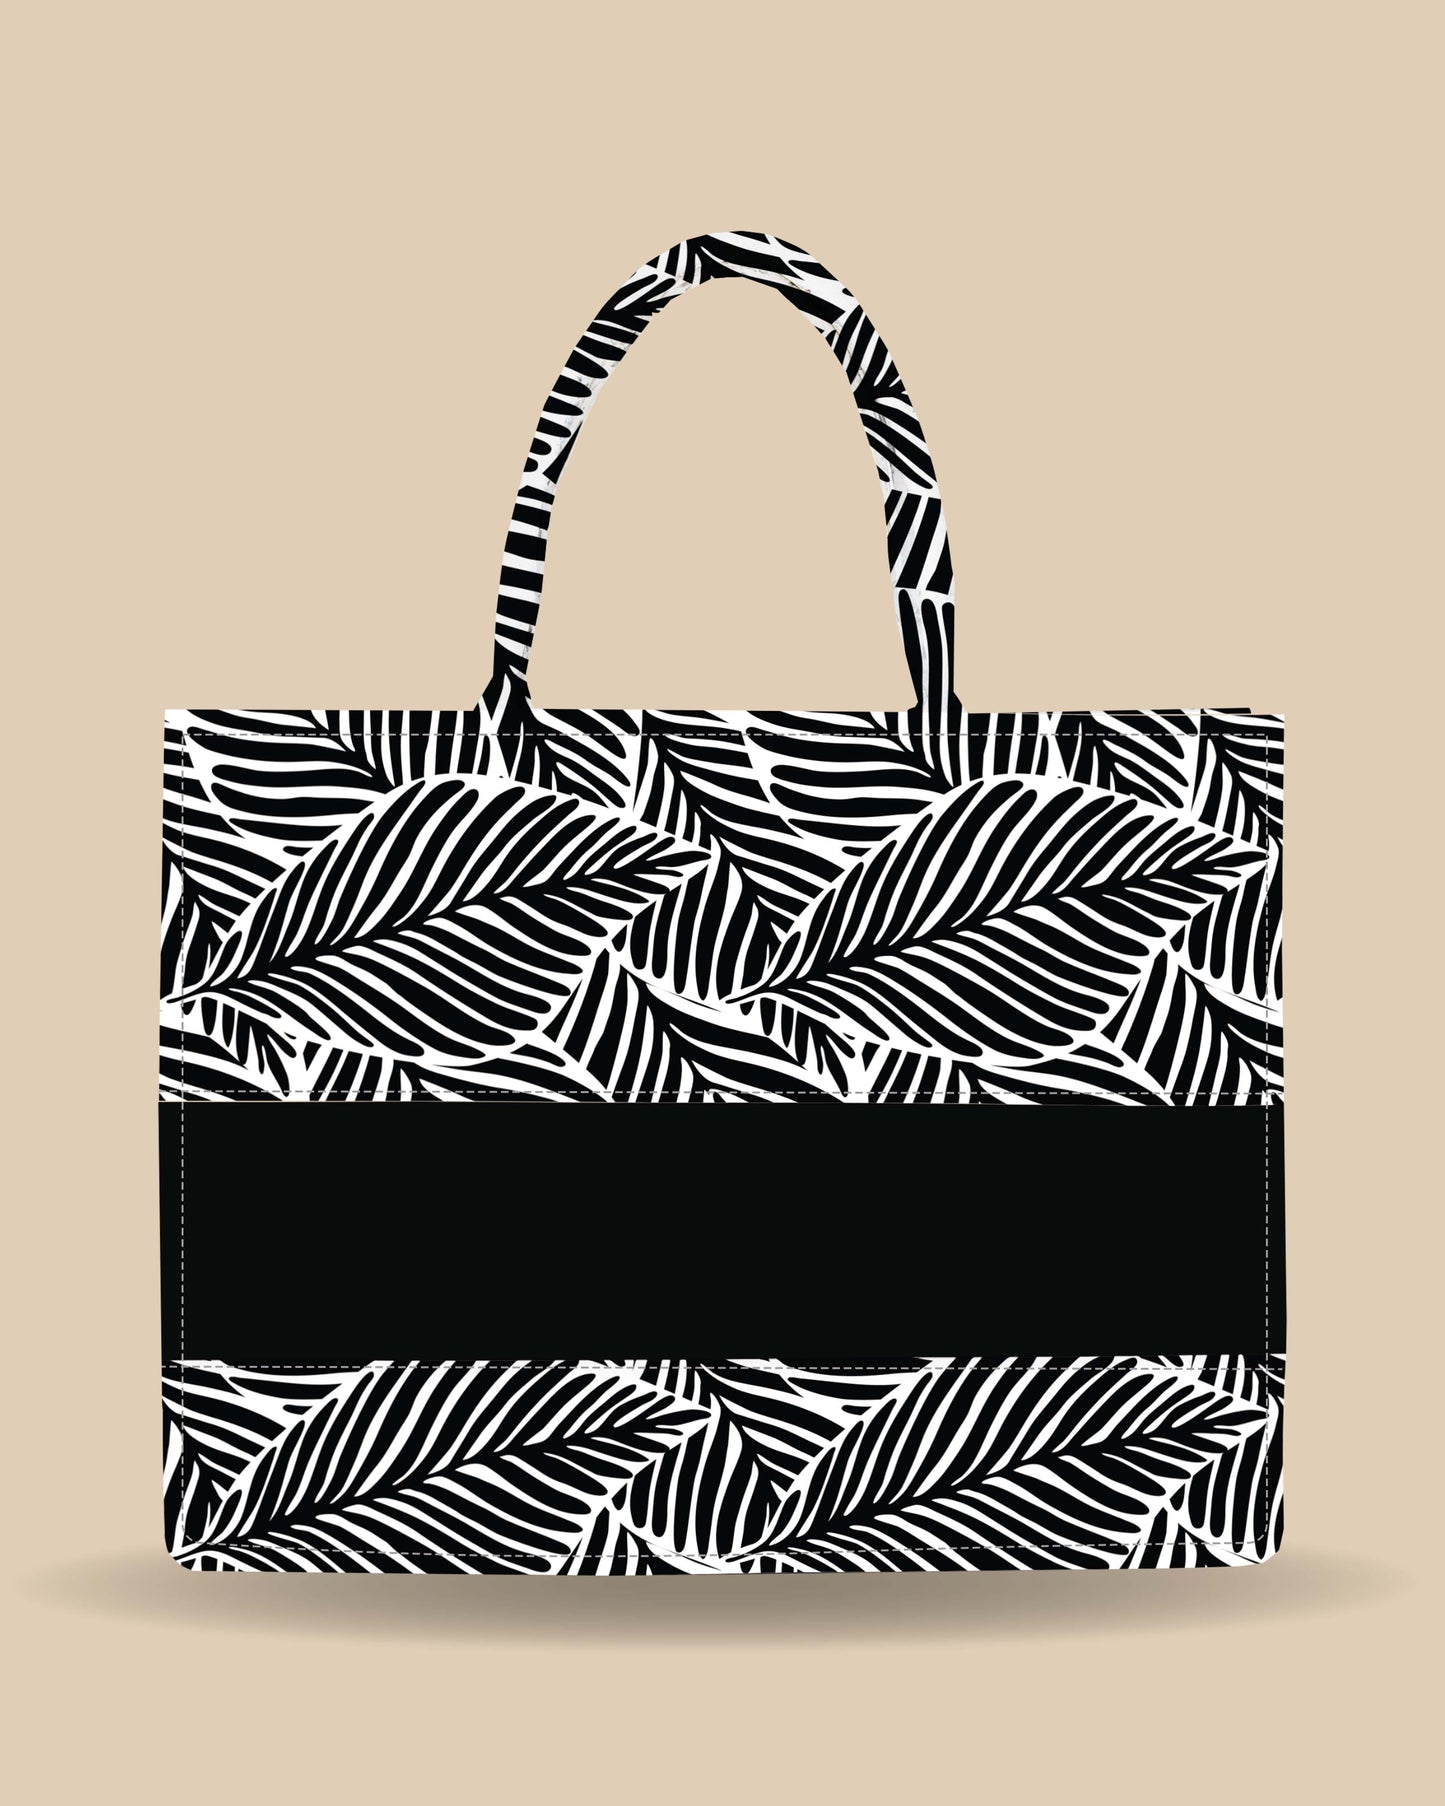 Customized Tote Bag Designed with Tropical Leaf Calligraphy